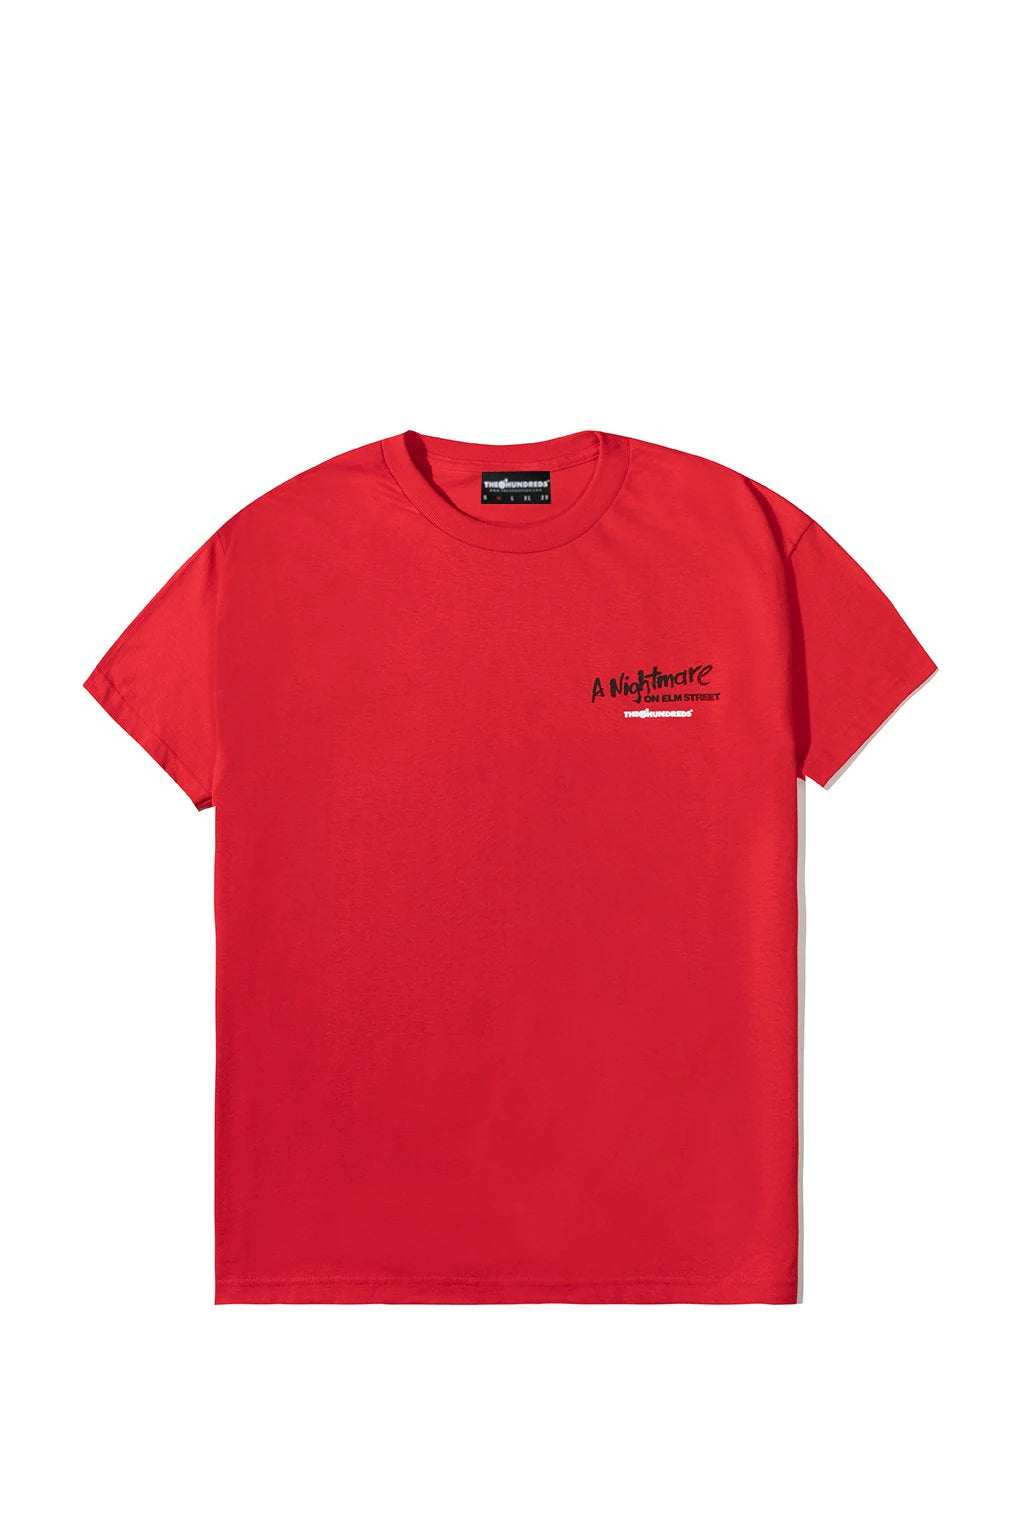 The Hundreds x Nightmare on Elm Street Cover T Shirt - Red